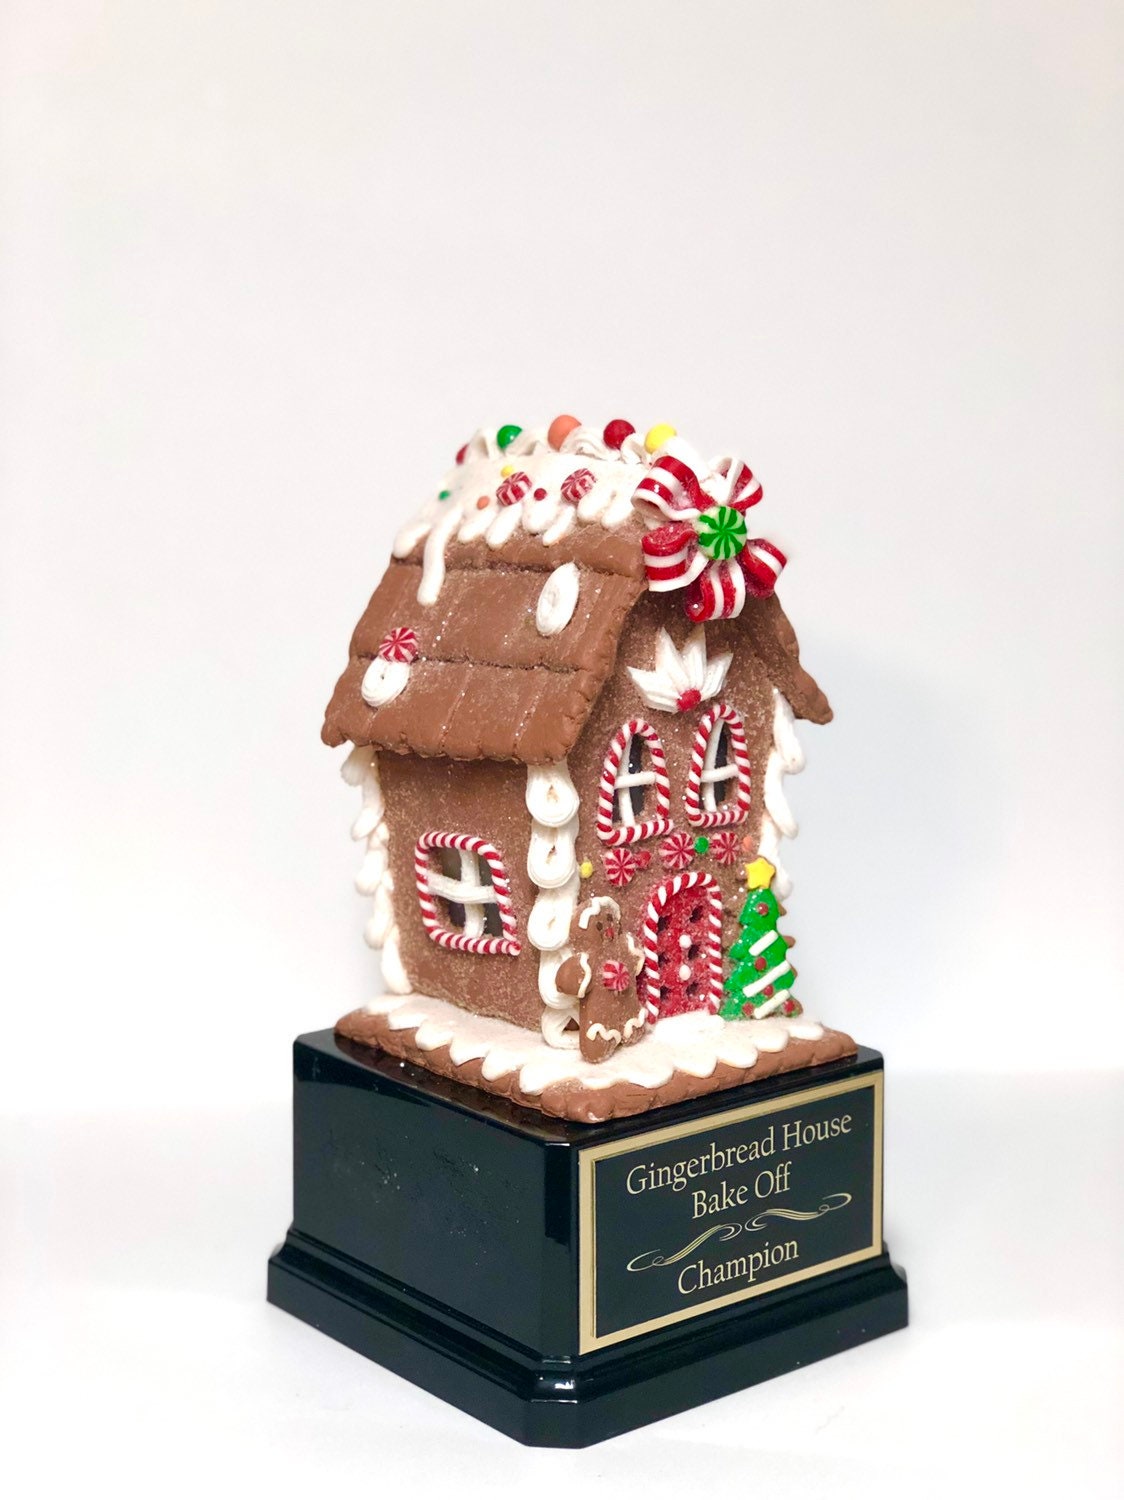 Gingerbread House Cookie Bake Off Trophy 8" Med Size Ugly Sweater Trophy Contest Award Christmas Holiday Party Cookie Santa Christmas Decor